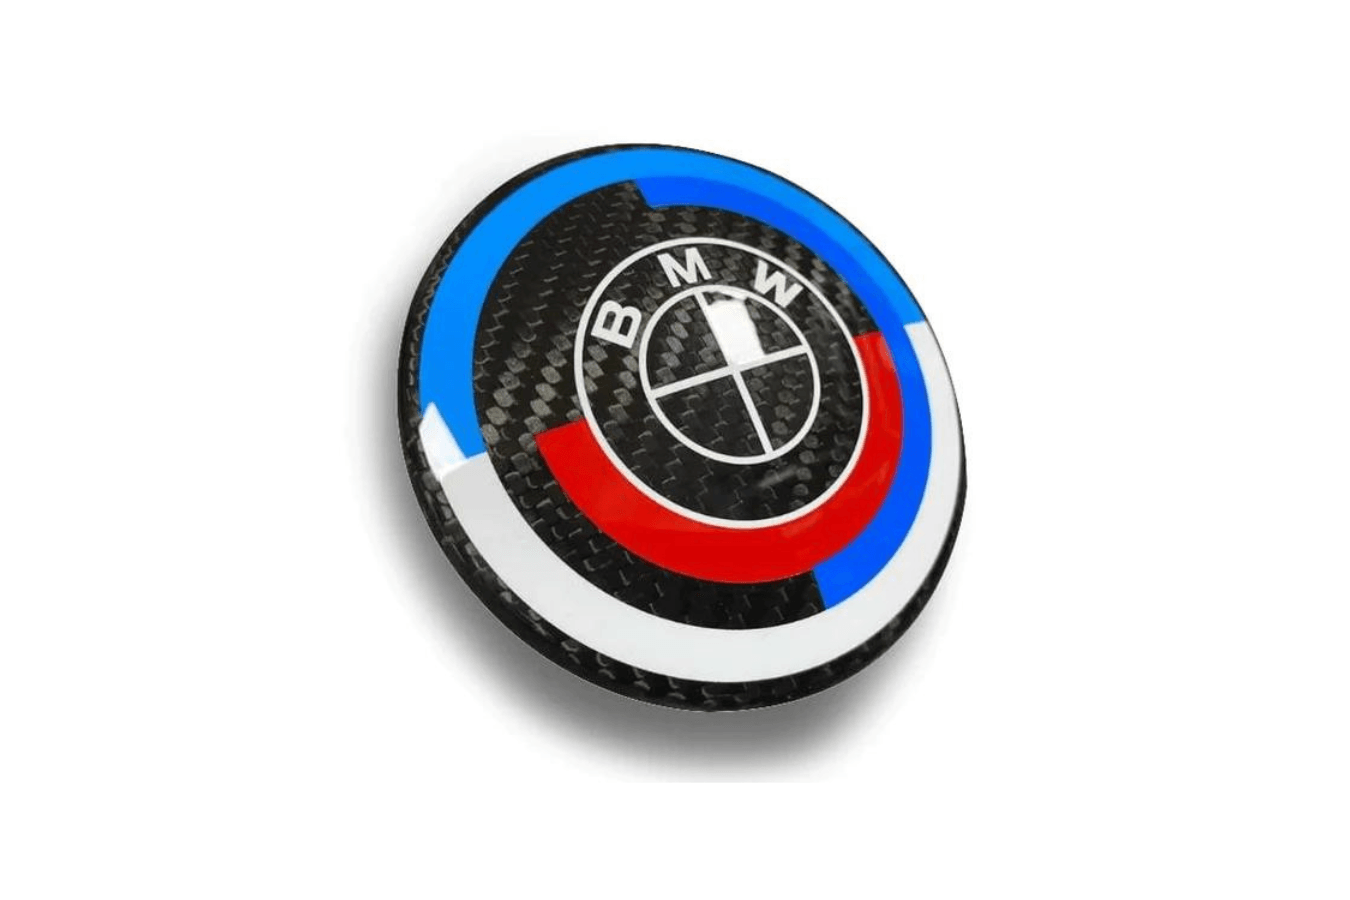 BMW Roundel Emblems - Full Carbon 50th Anniversary Style - K2 Industries